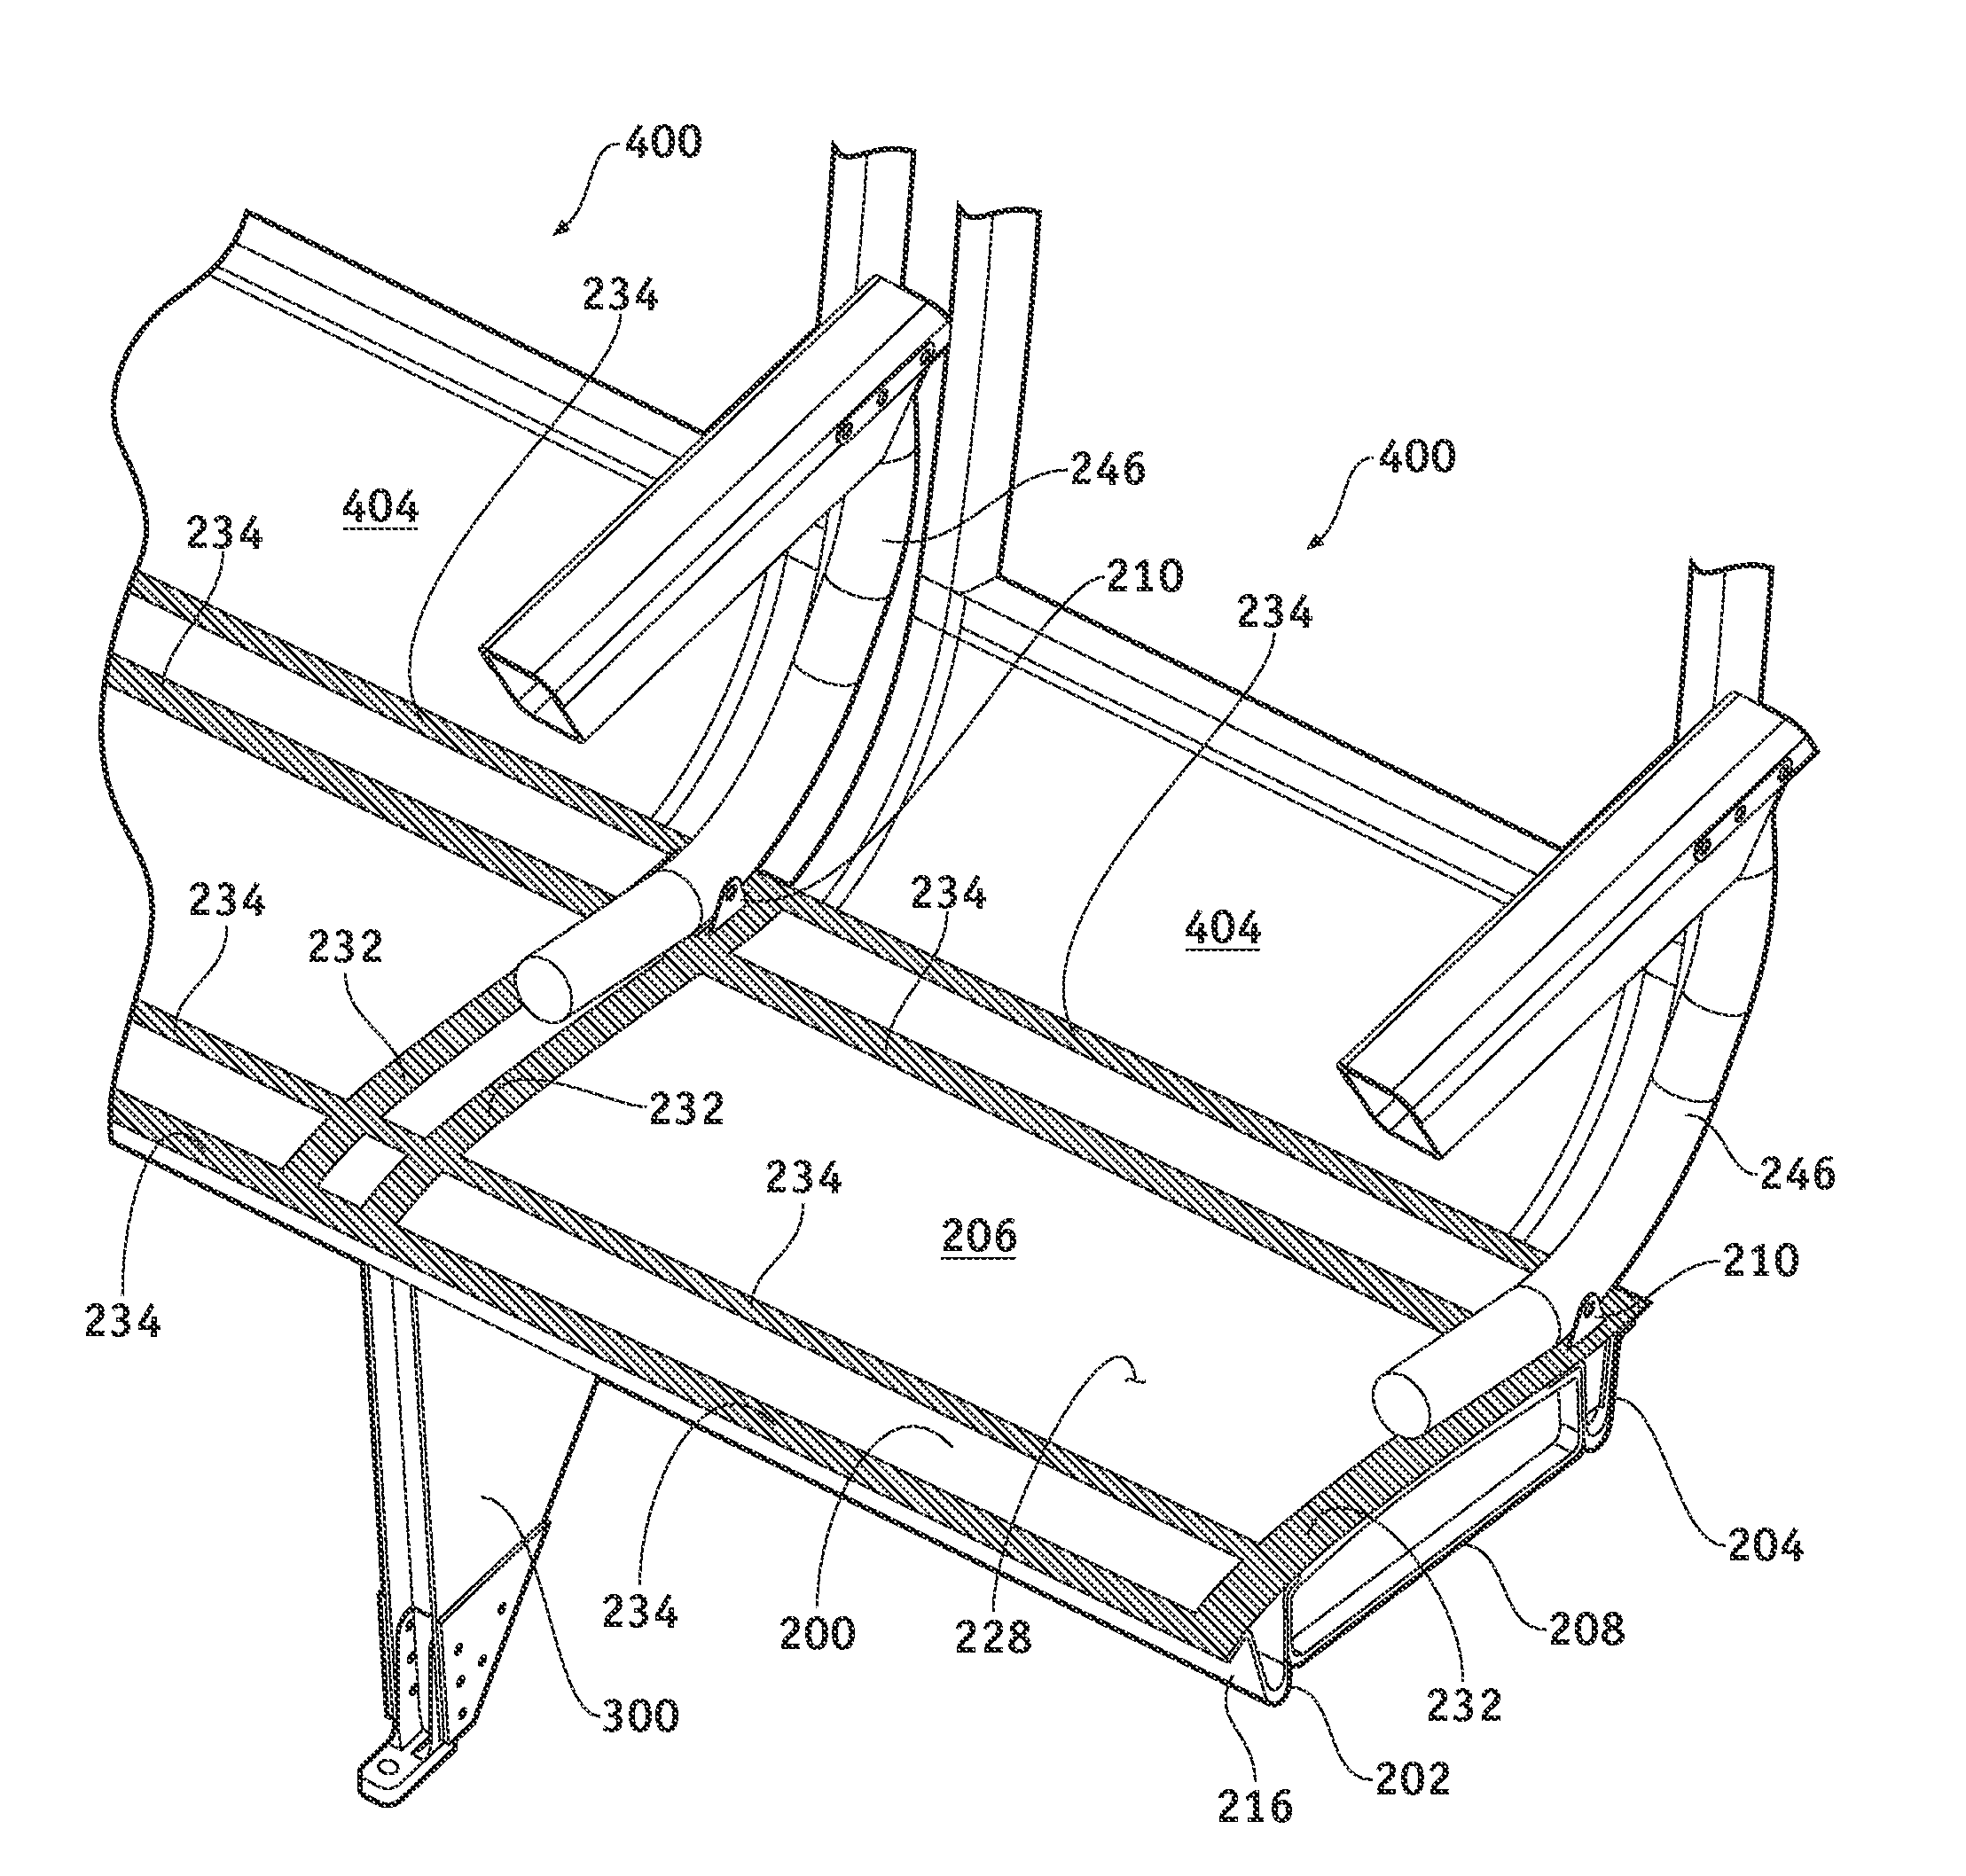 Composite seat pan structure for a lightweight aircraft seat assembly